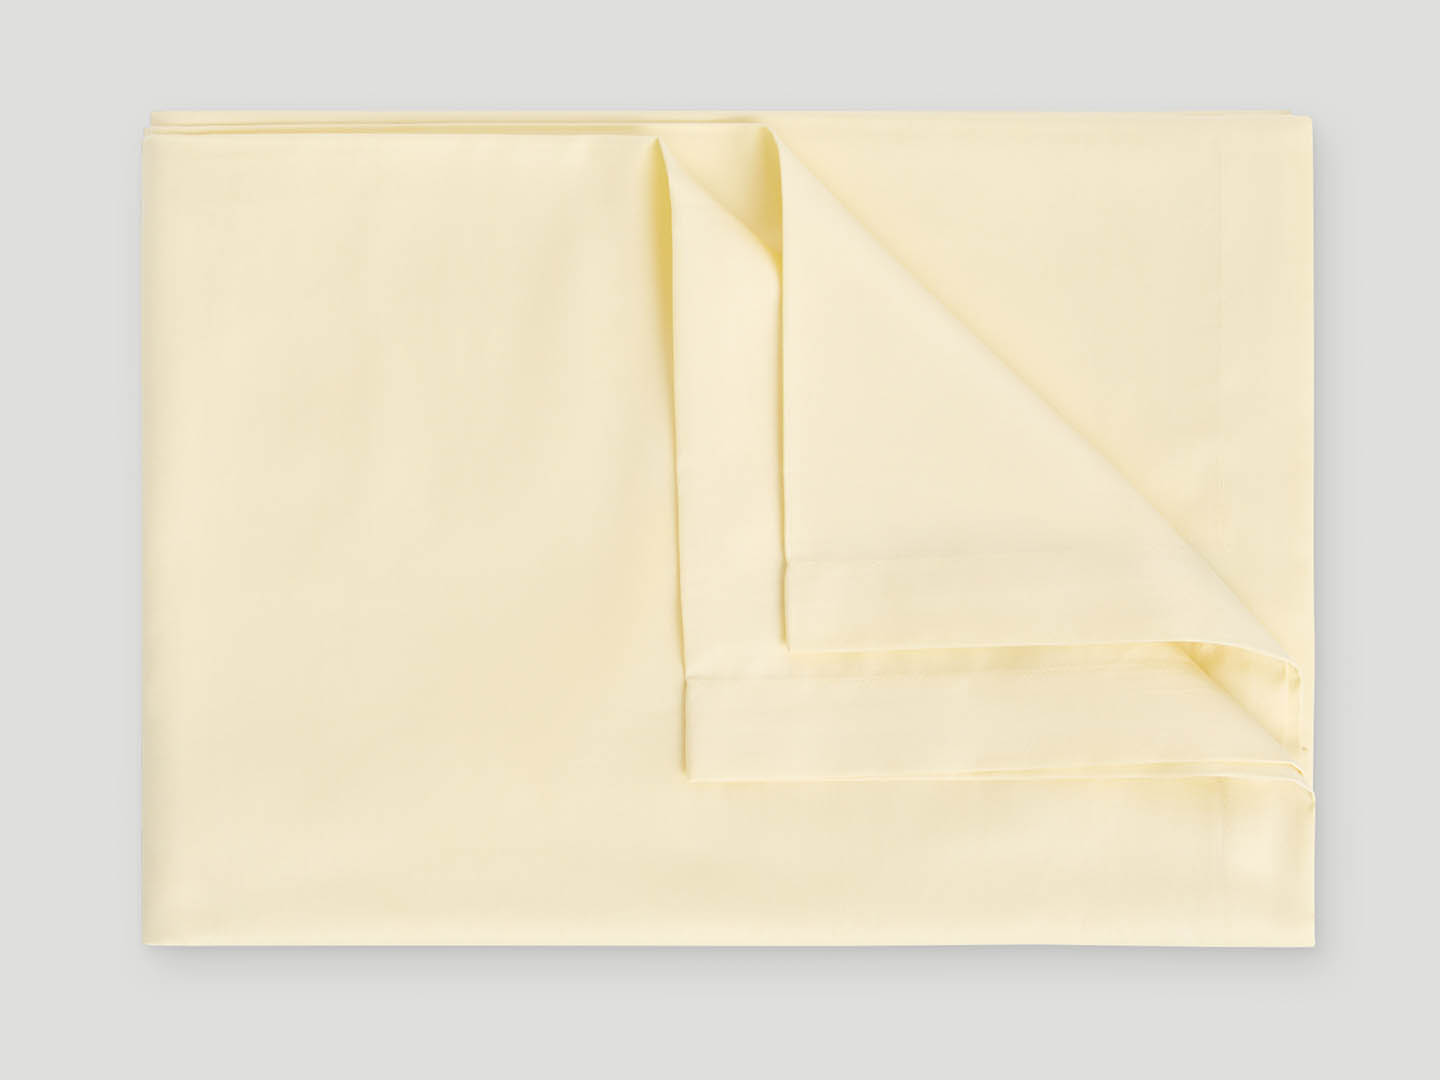 Flat Sheet Lind - Lemonade Yellow in the group Bedding / Flat Sheets at A L V A (1244)